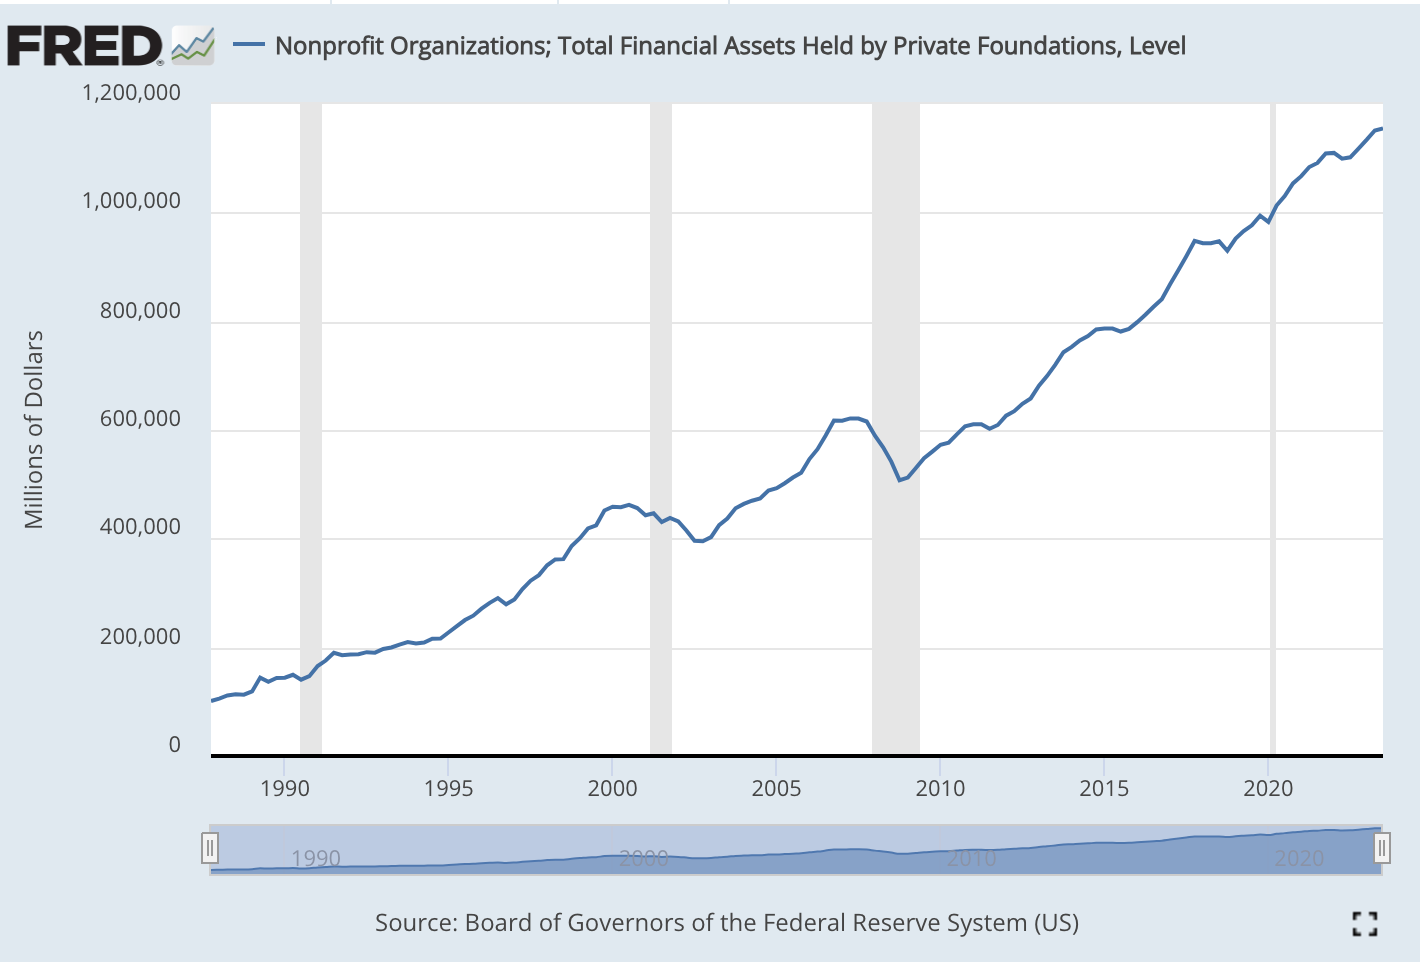 Federal reserve chart showing nearly 1.2 trillion in assets held by private foundations in 2023, up from $100,000 in 1985